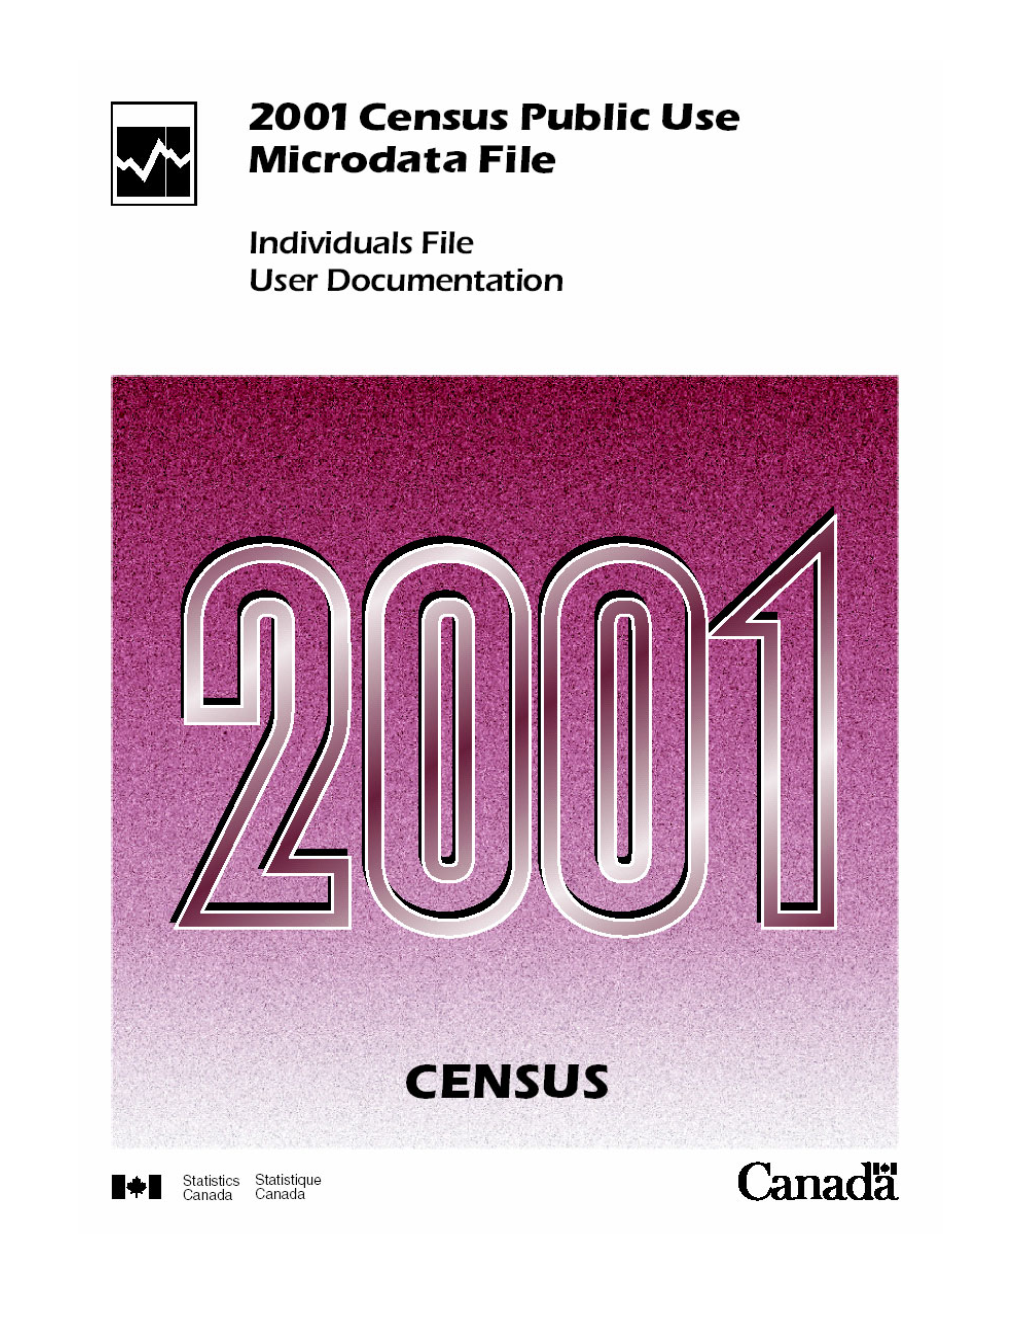 2001 Census Public Use Microdata File (PUMF) on Individuals Contains Data Based on a 2.7% Sample of the Population Enumerated in the Census